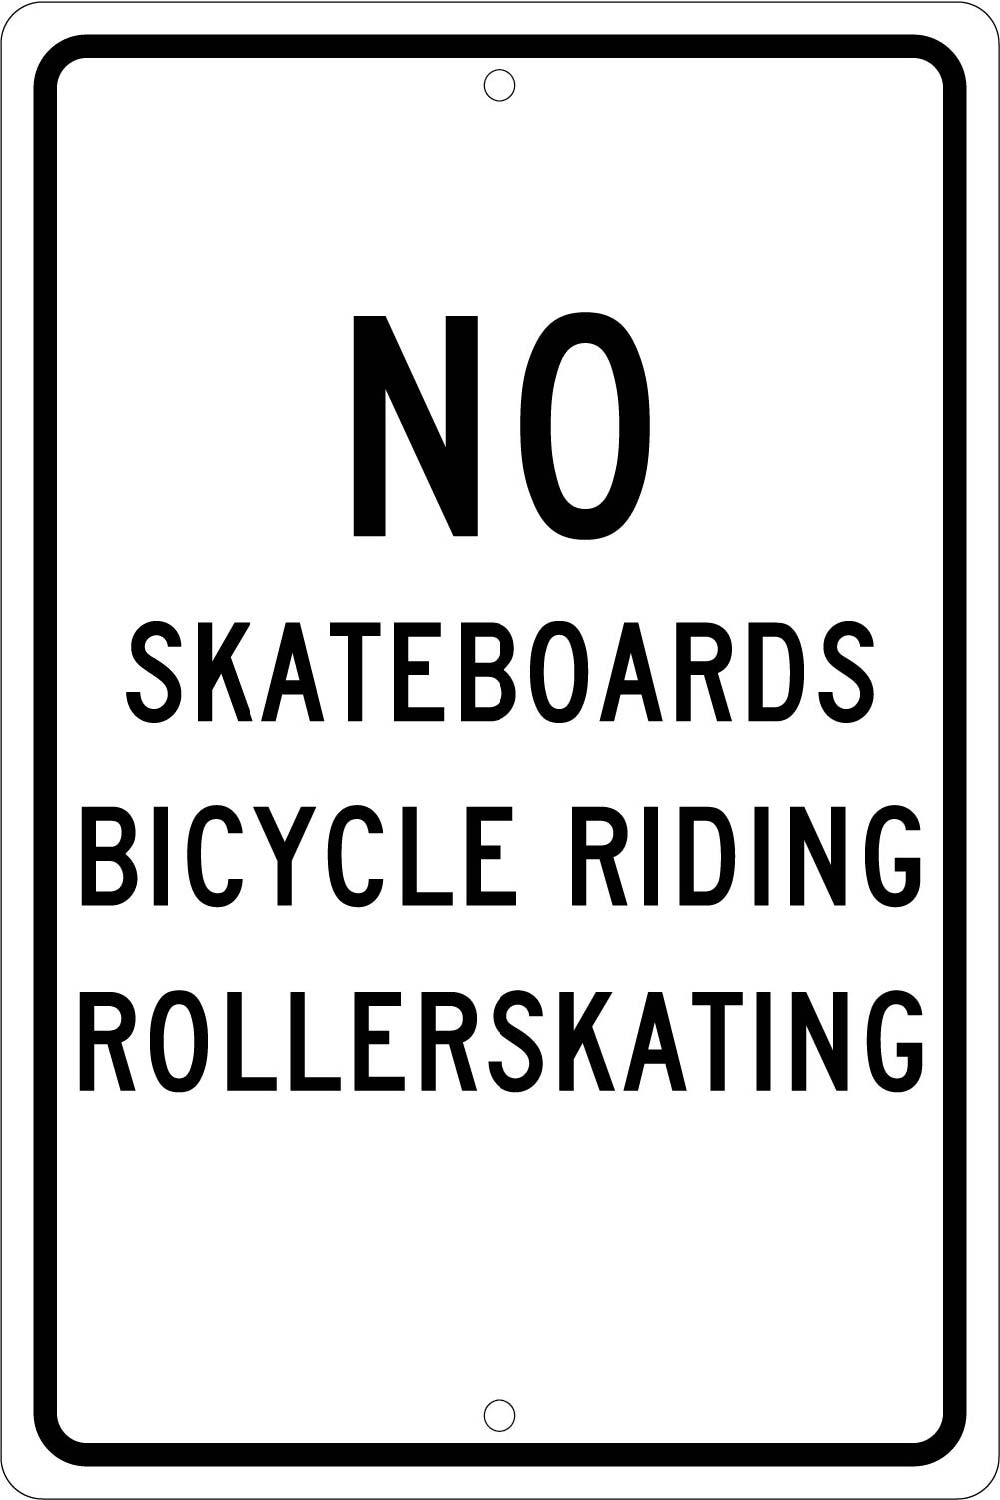 No Skateboards Bicycle Riding Rollerskating Sign-eSafety Supplies, Inc